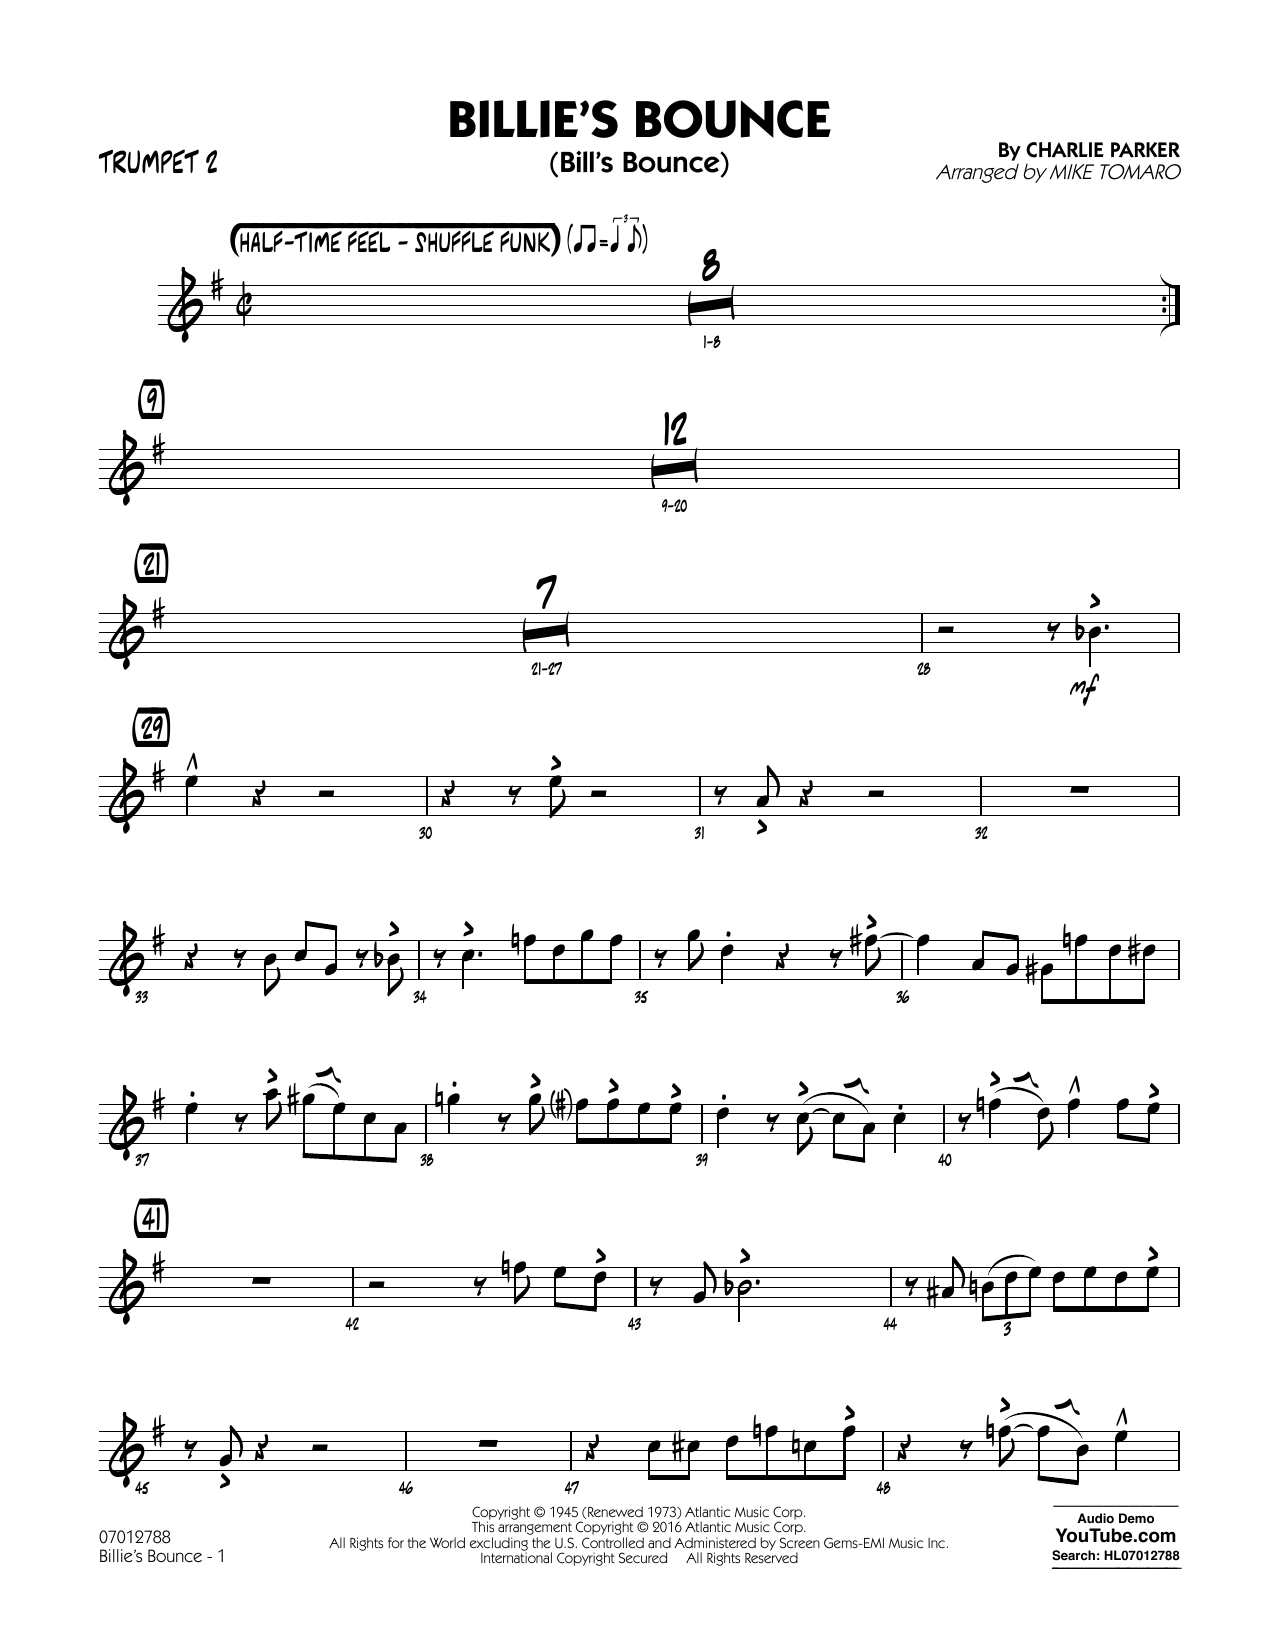 Download Mike Tomaro Billie's Bounce - Trumpet 2 Sheet Music